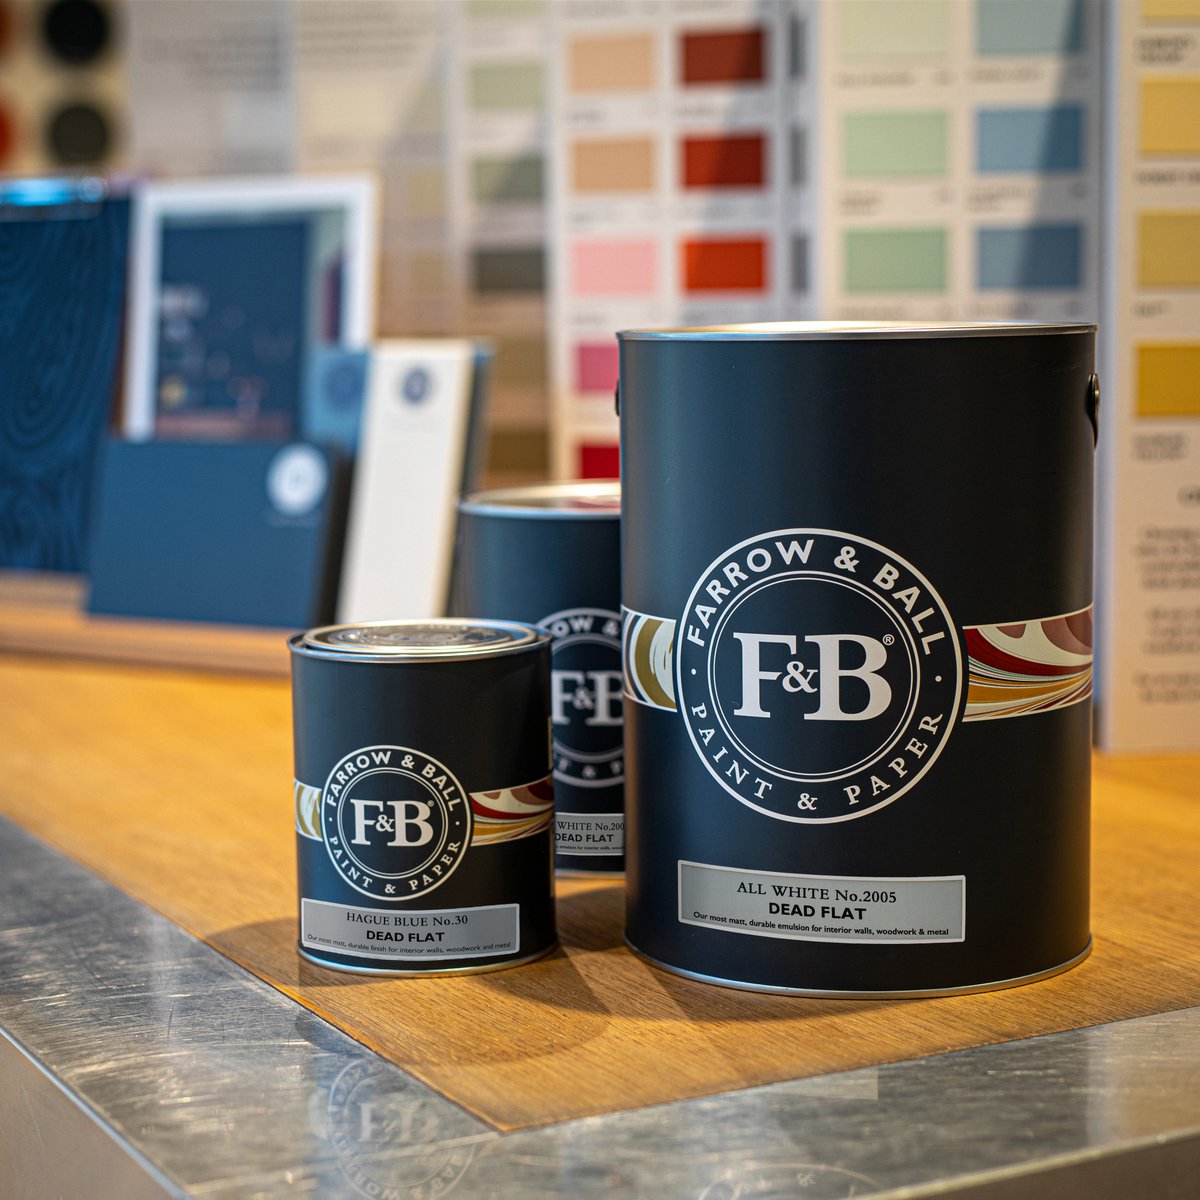 Order your #designerpaints online now and get FREE delivery on orders £100+! Huge stocks of paints ready for same day dispatch. #decor #interiordesign #paint #farrowandball #littlegreene